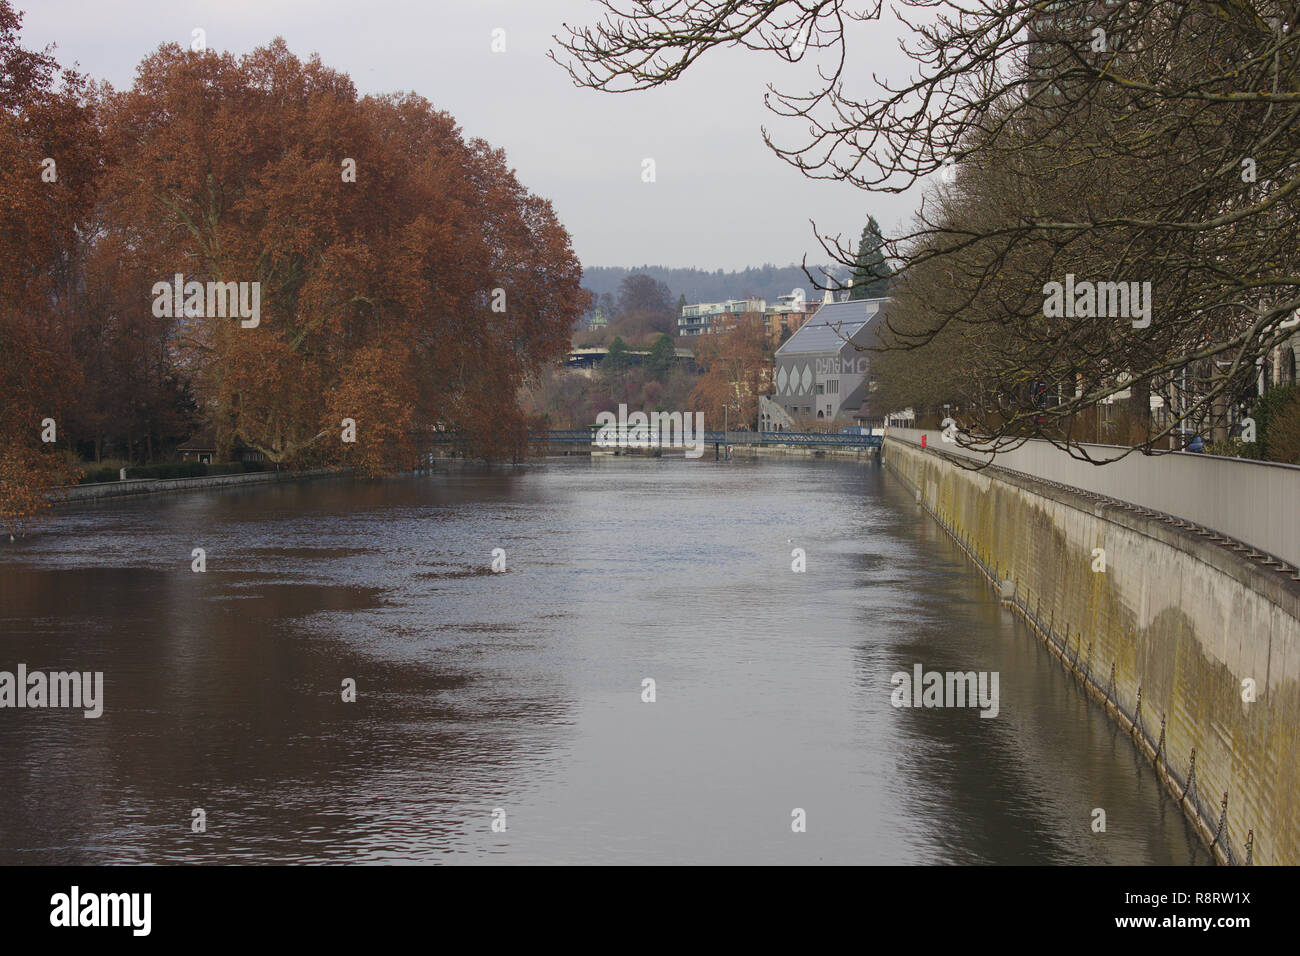 A peaceful river flow. Stock Photo